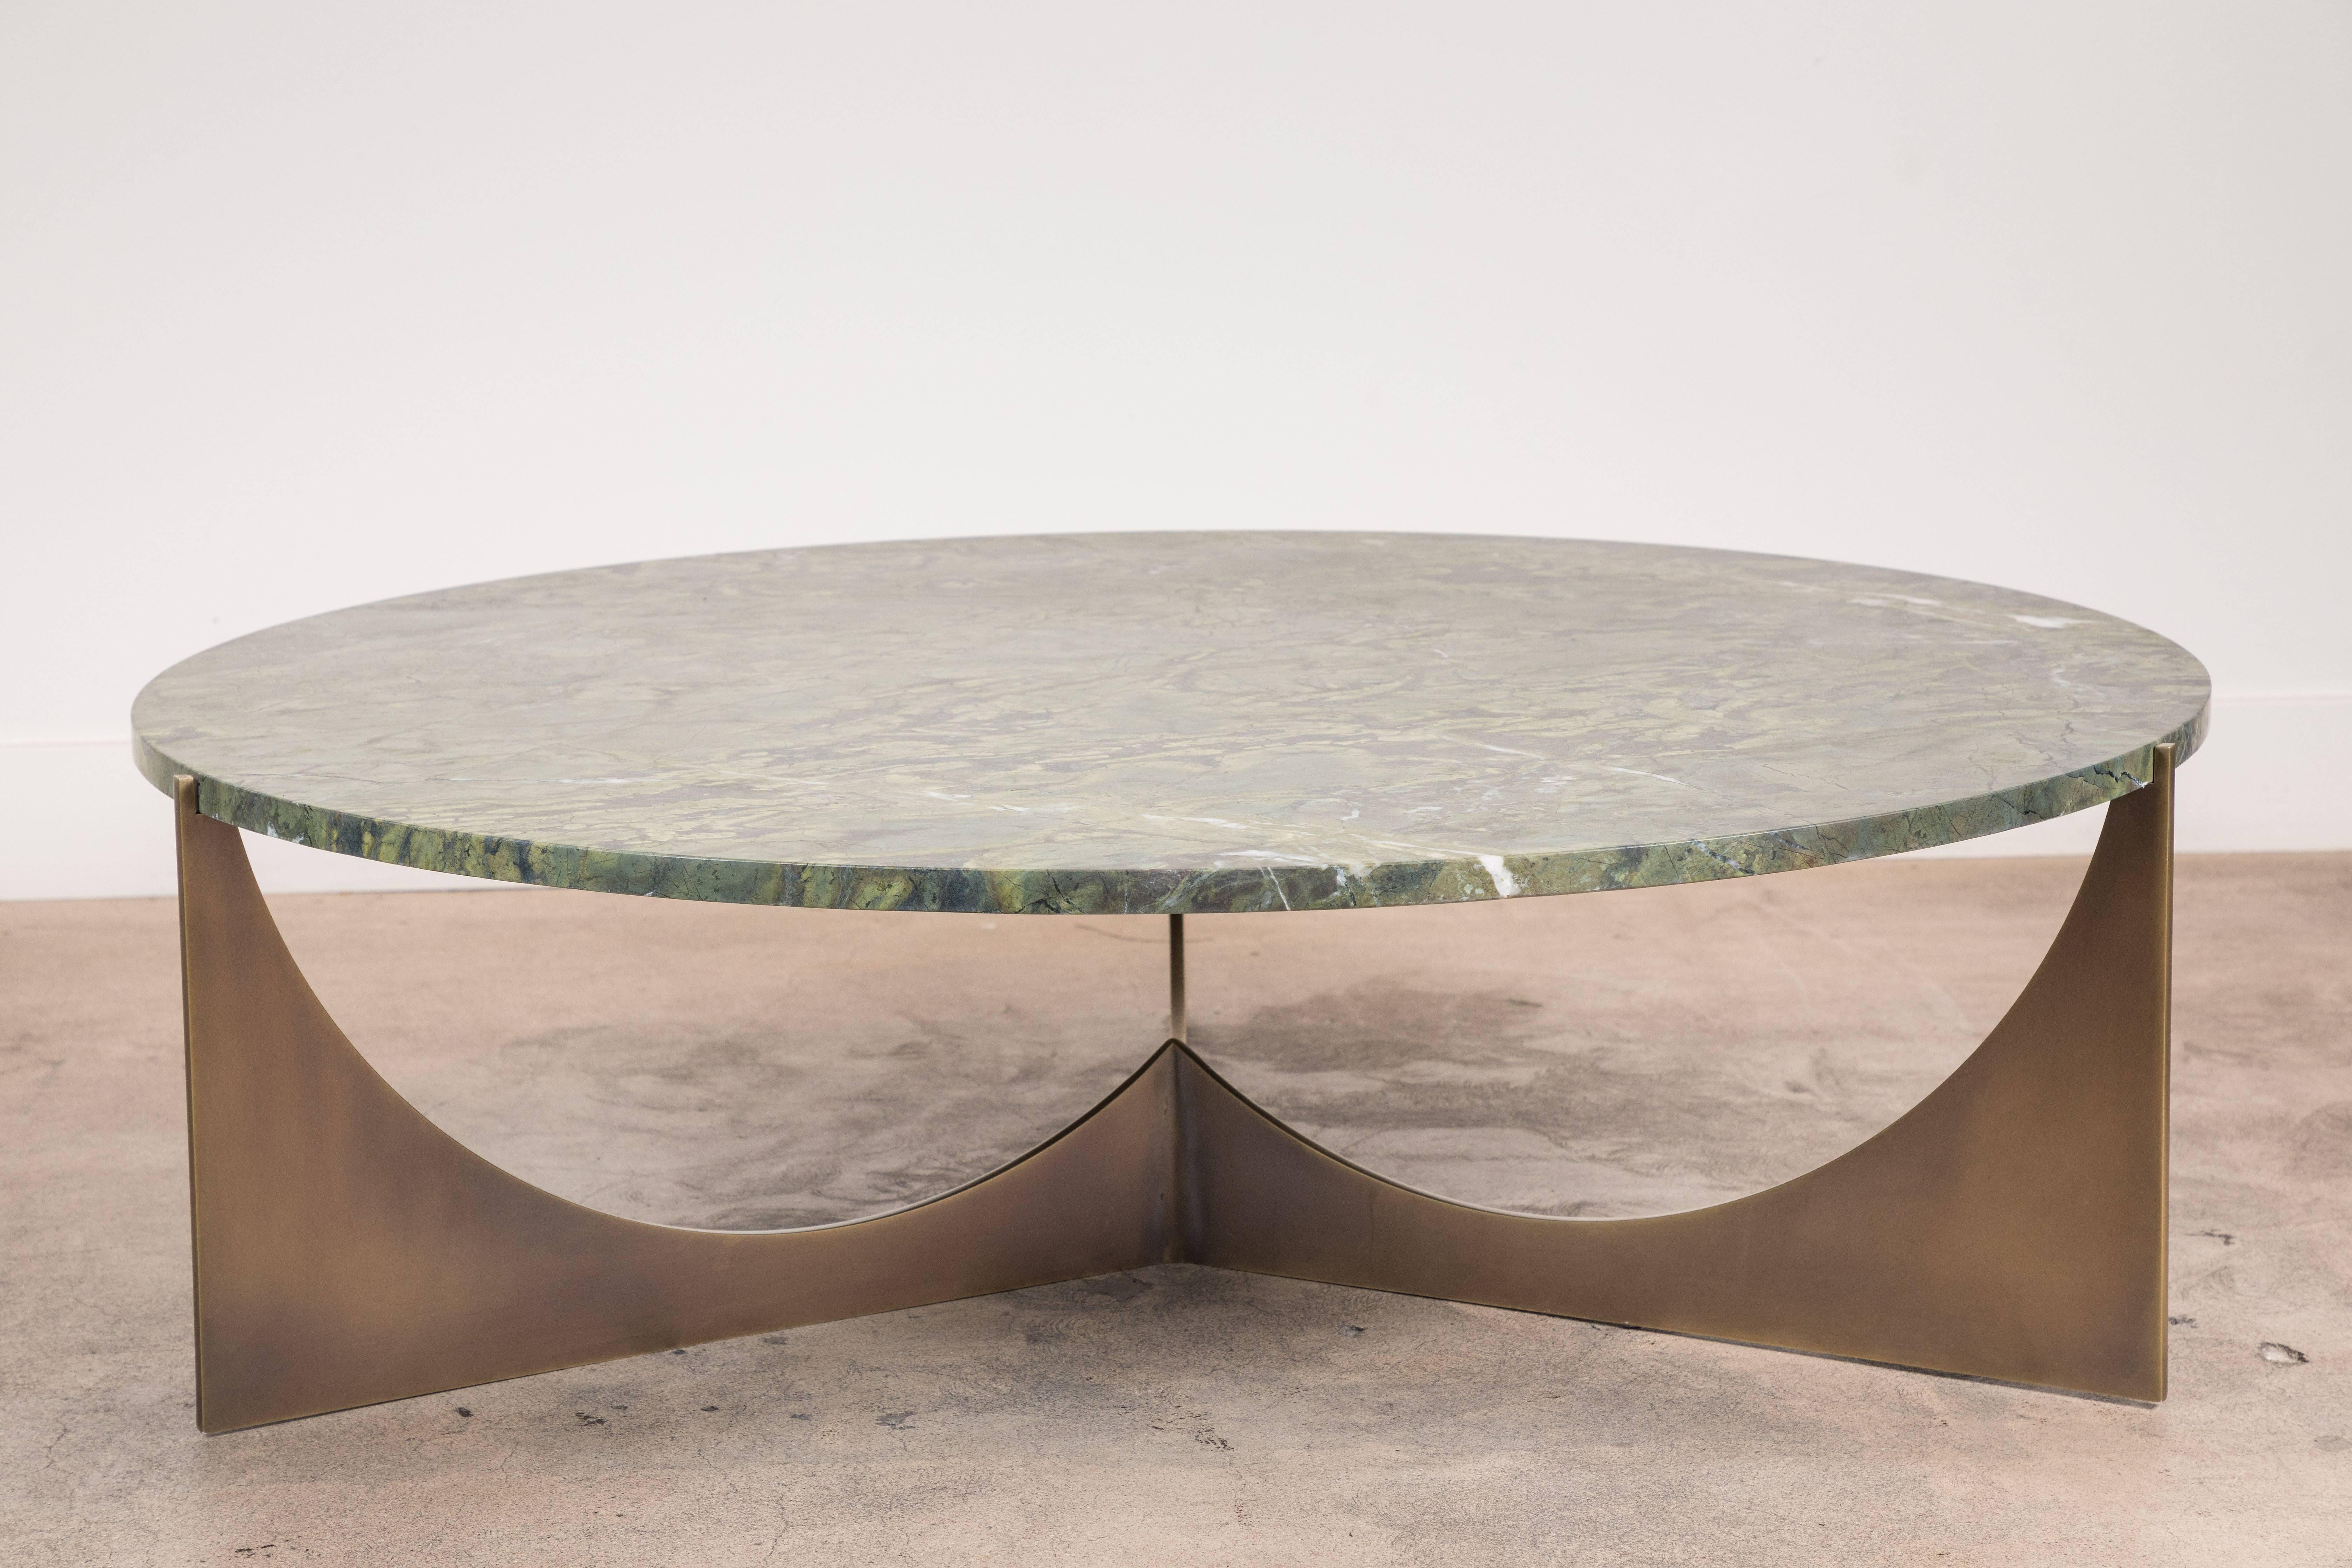 Eclipse coffee table by Ten10 in solid brass and green granite.